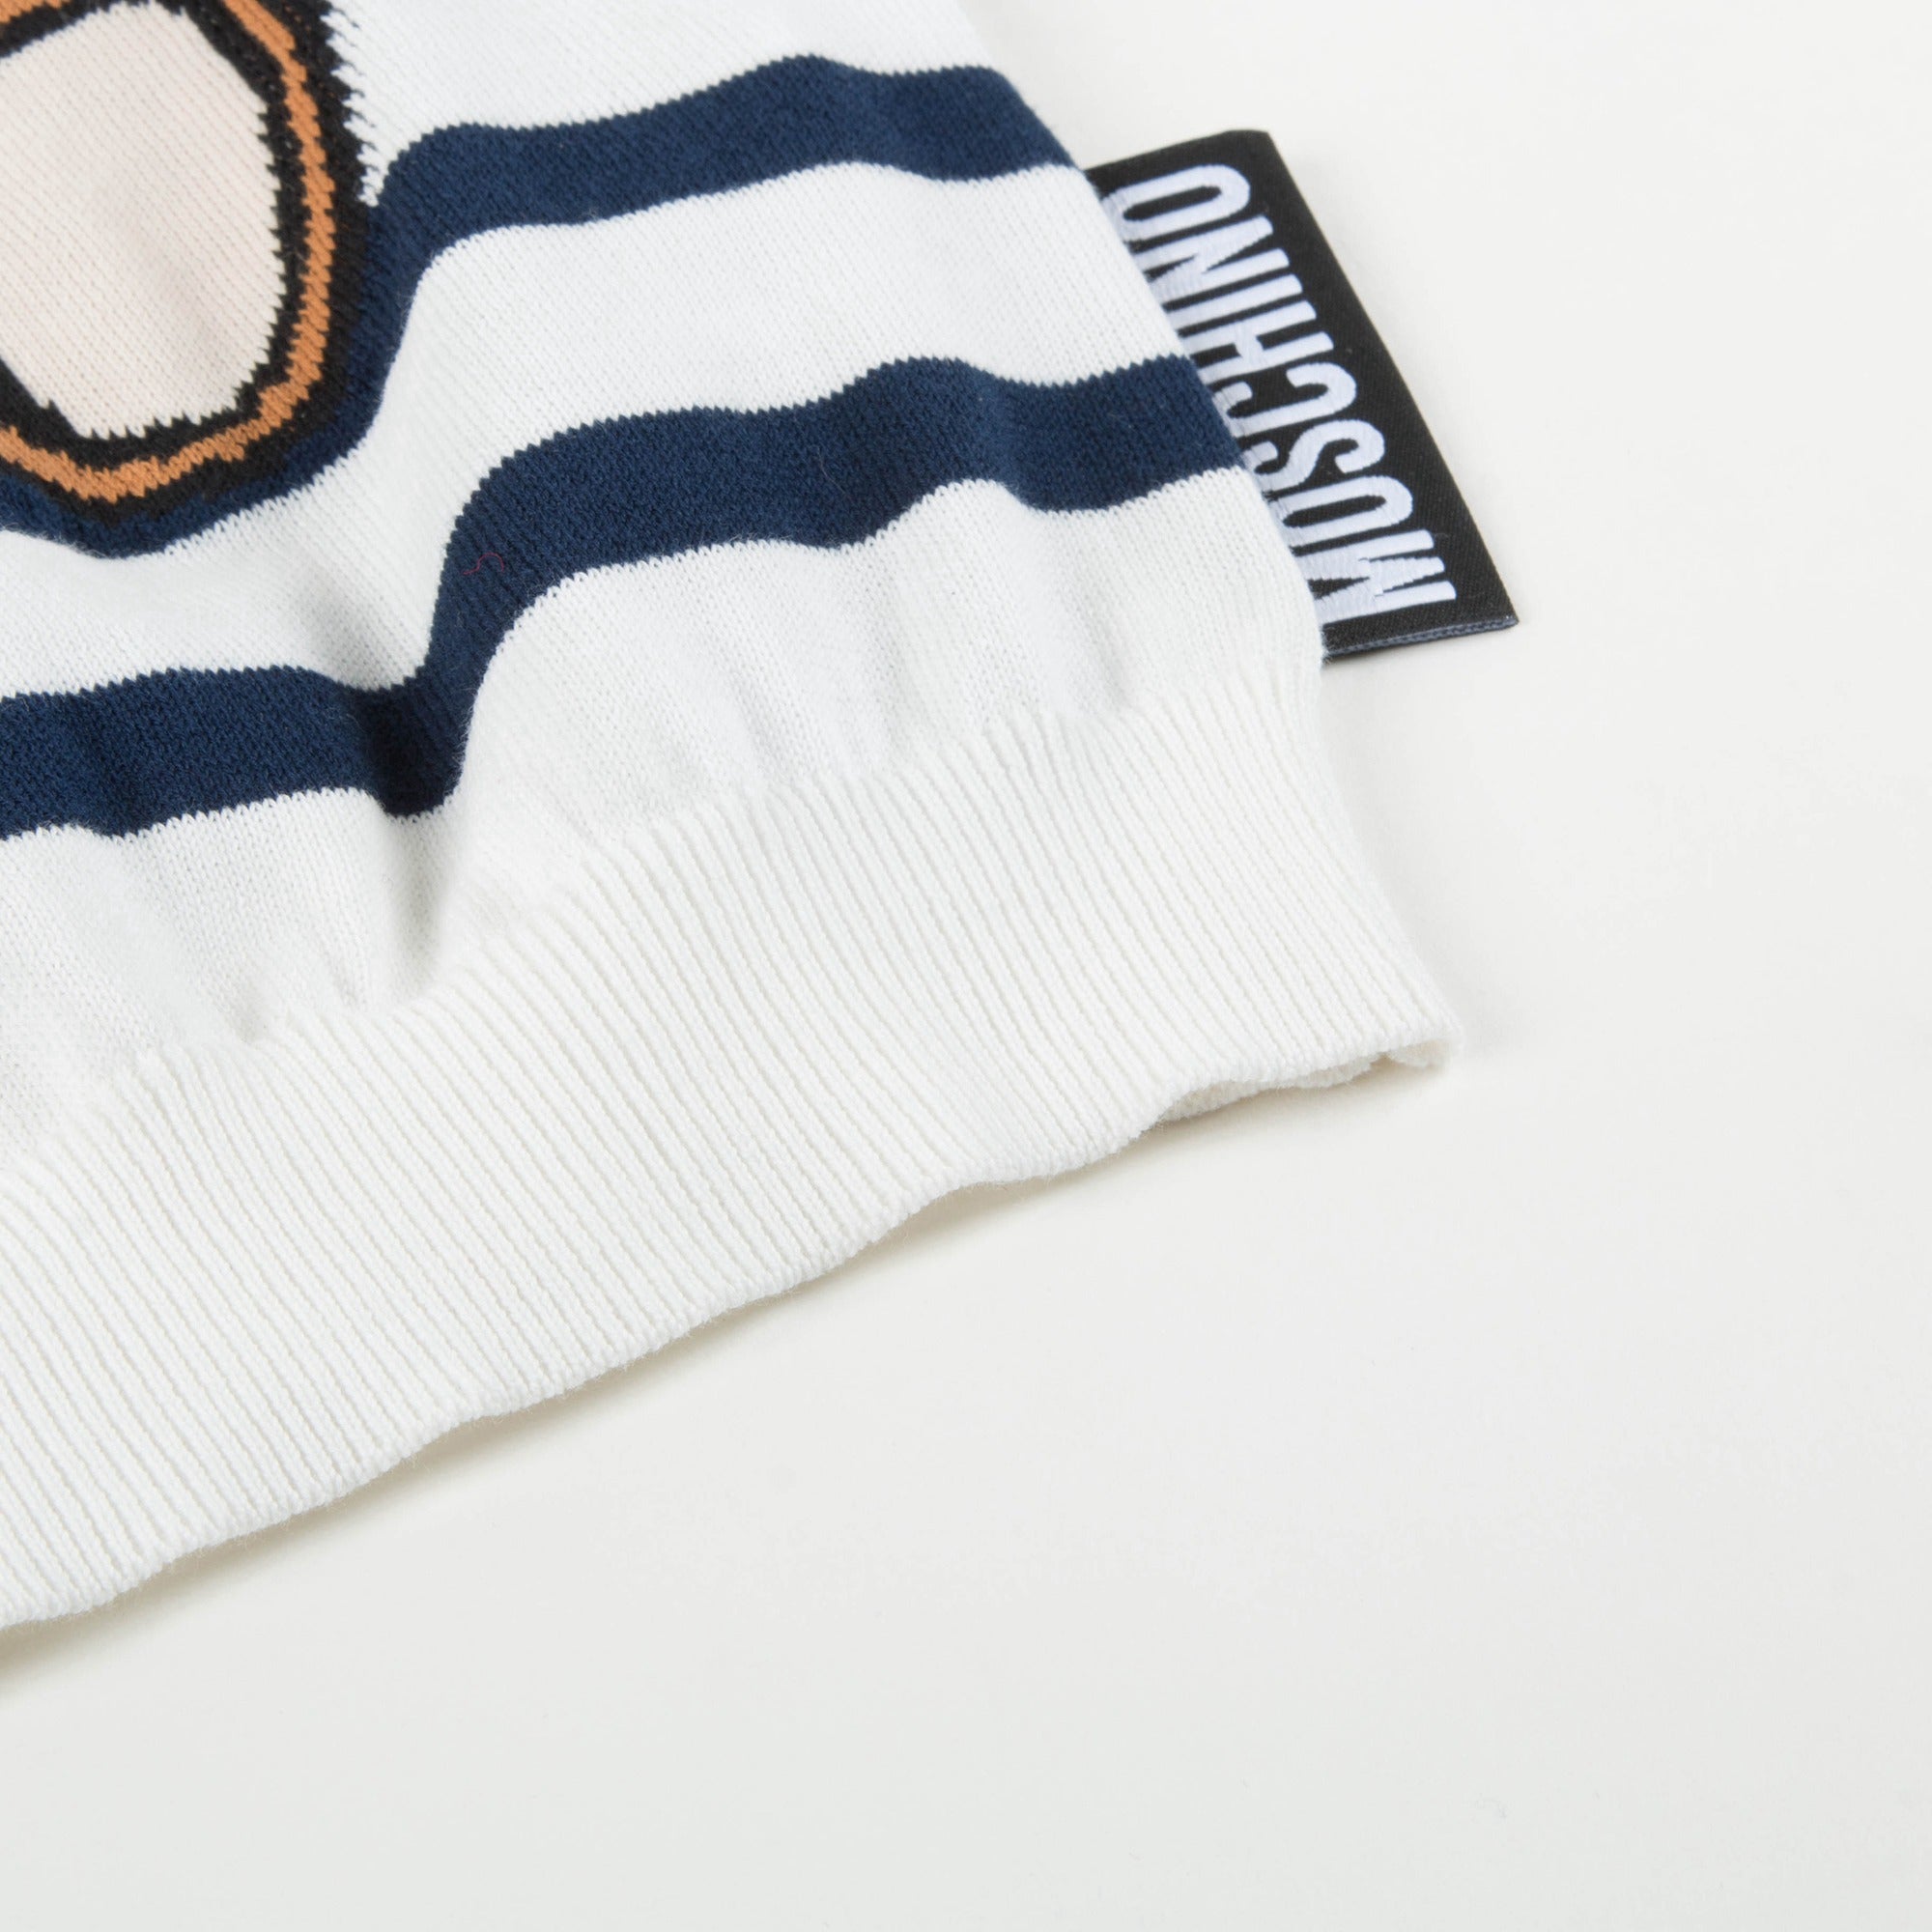 Baby White & Blue Striped Cotton Sweater